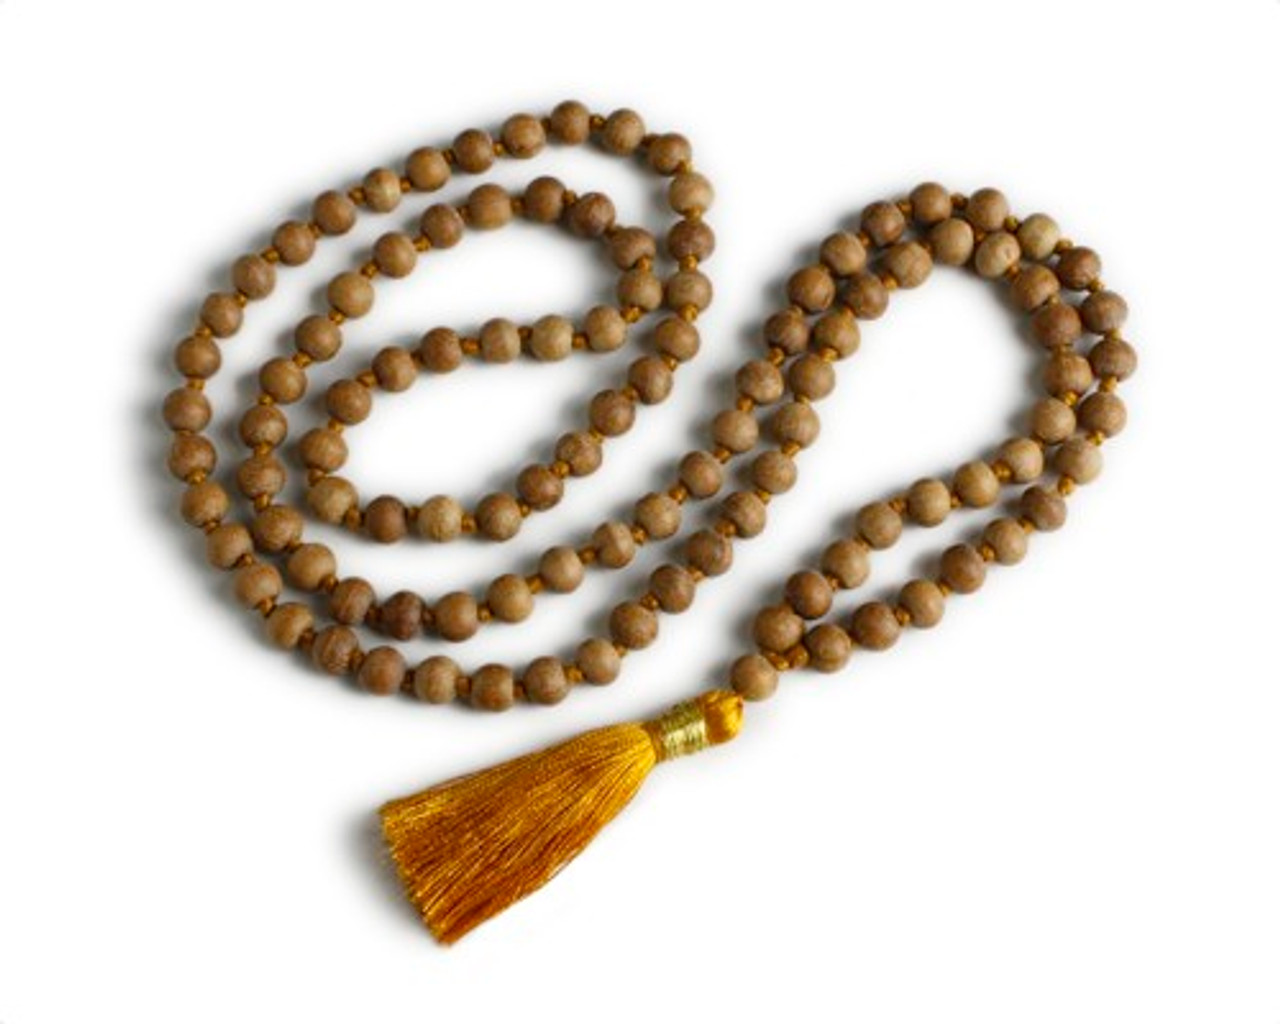 what is a mala necklace and how do you use it for meditation?